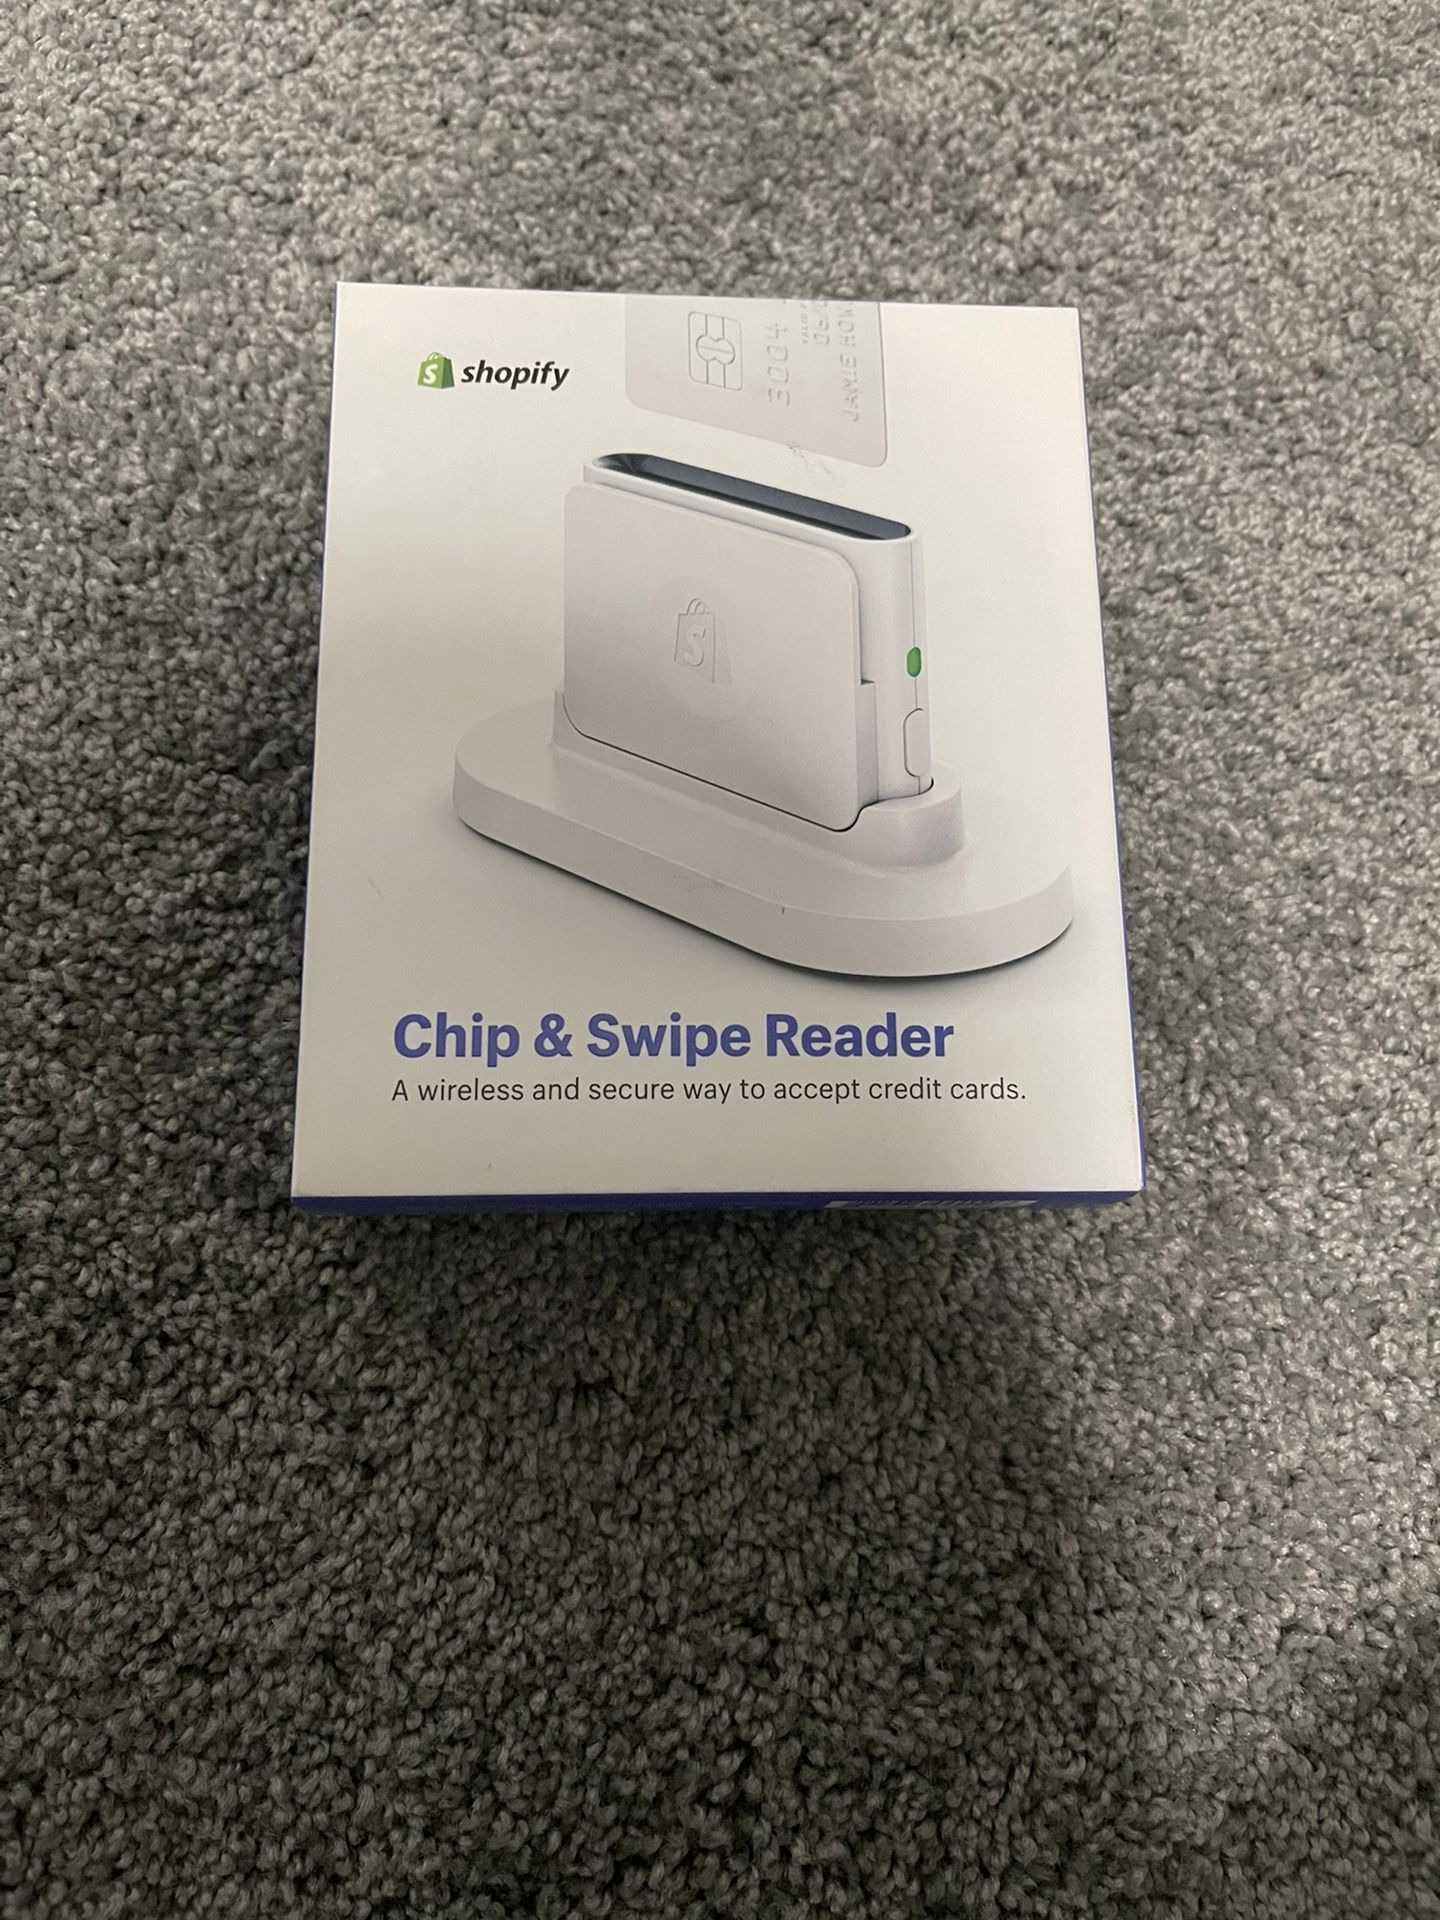 shopify chip and swipe reader not connecting